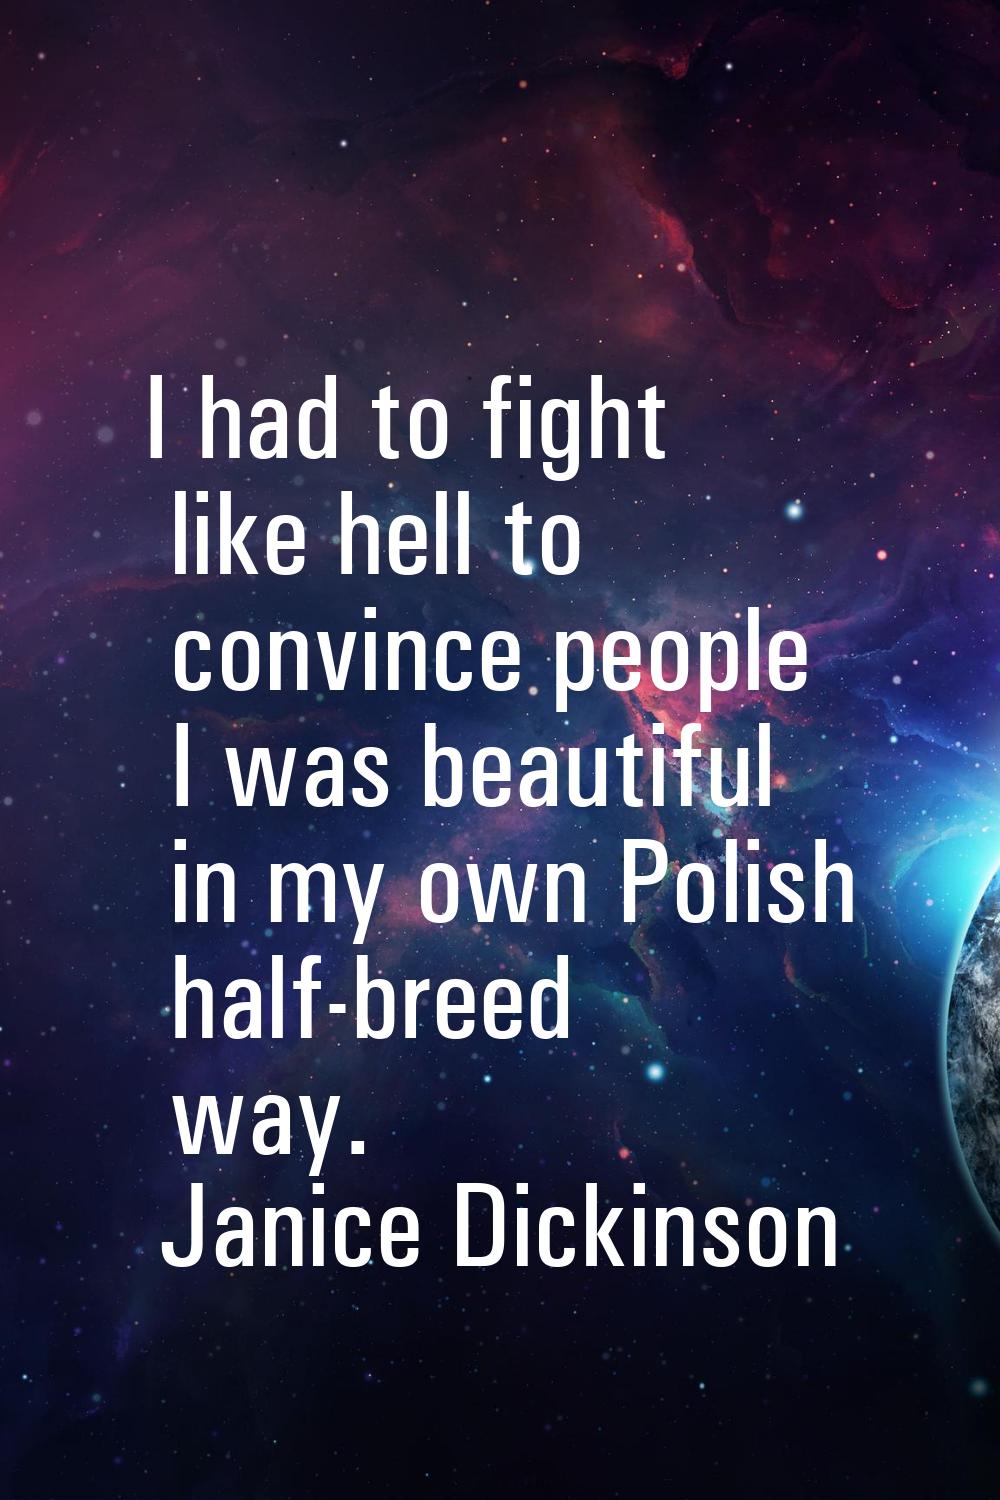 I had to fight like hell to convince people I was beautiful in my own Polish half-breed way.